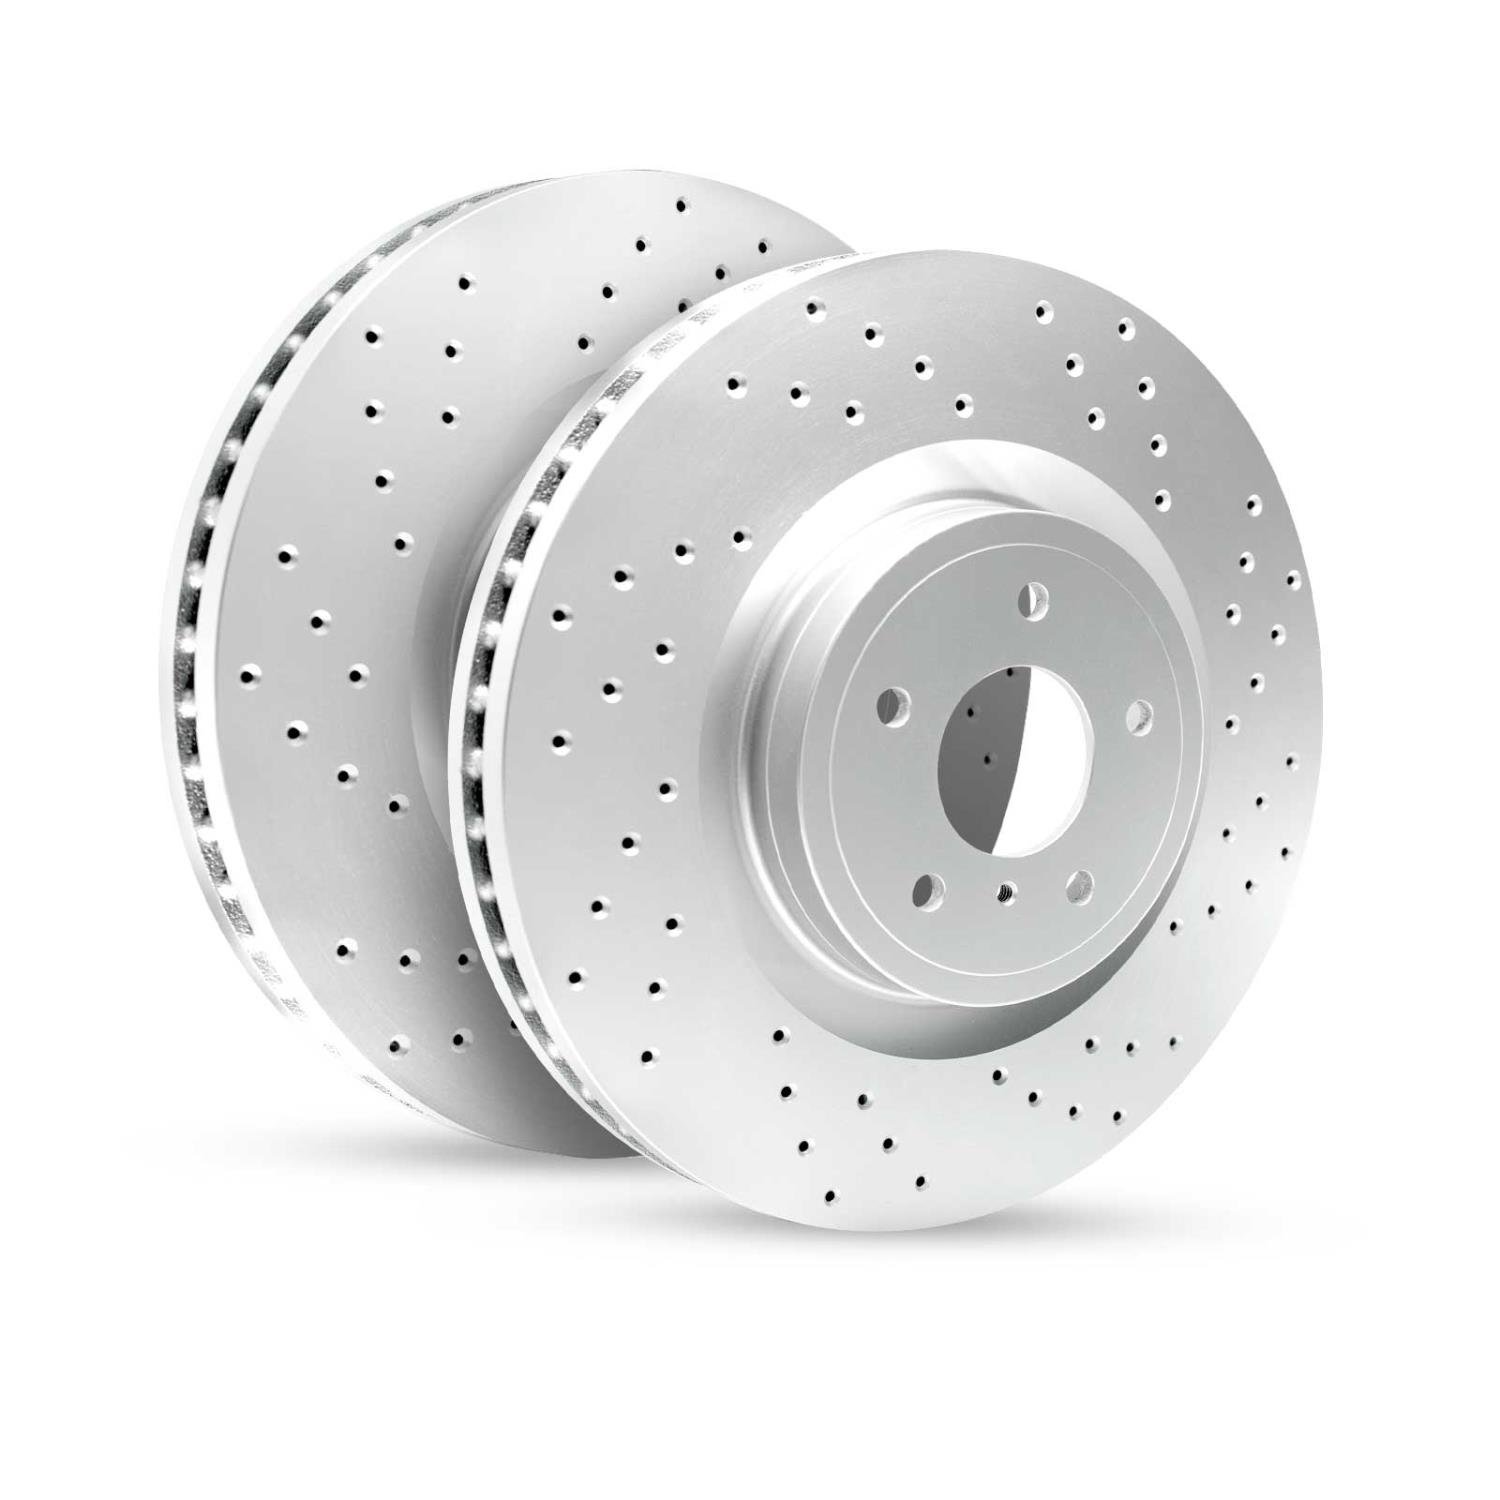 GEO-Carbon Drilled/Slotted Rotors, 1993-2002 Fits Multiple Makes/Models, Position: Front